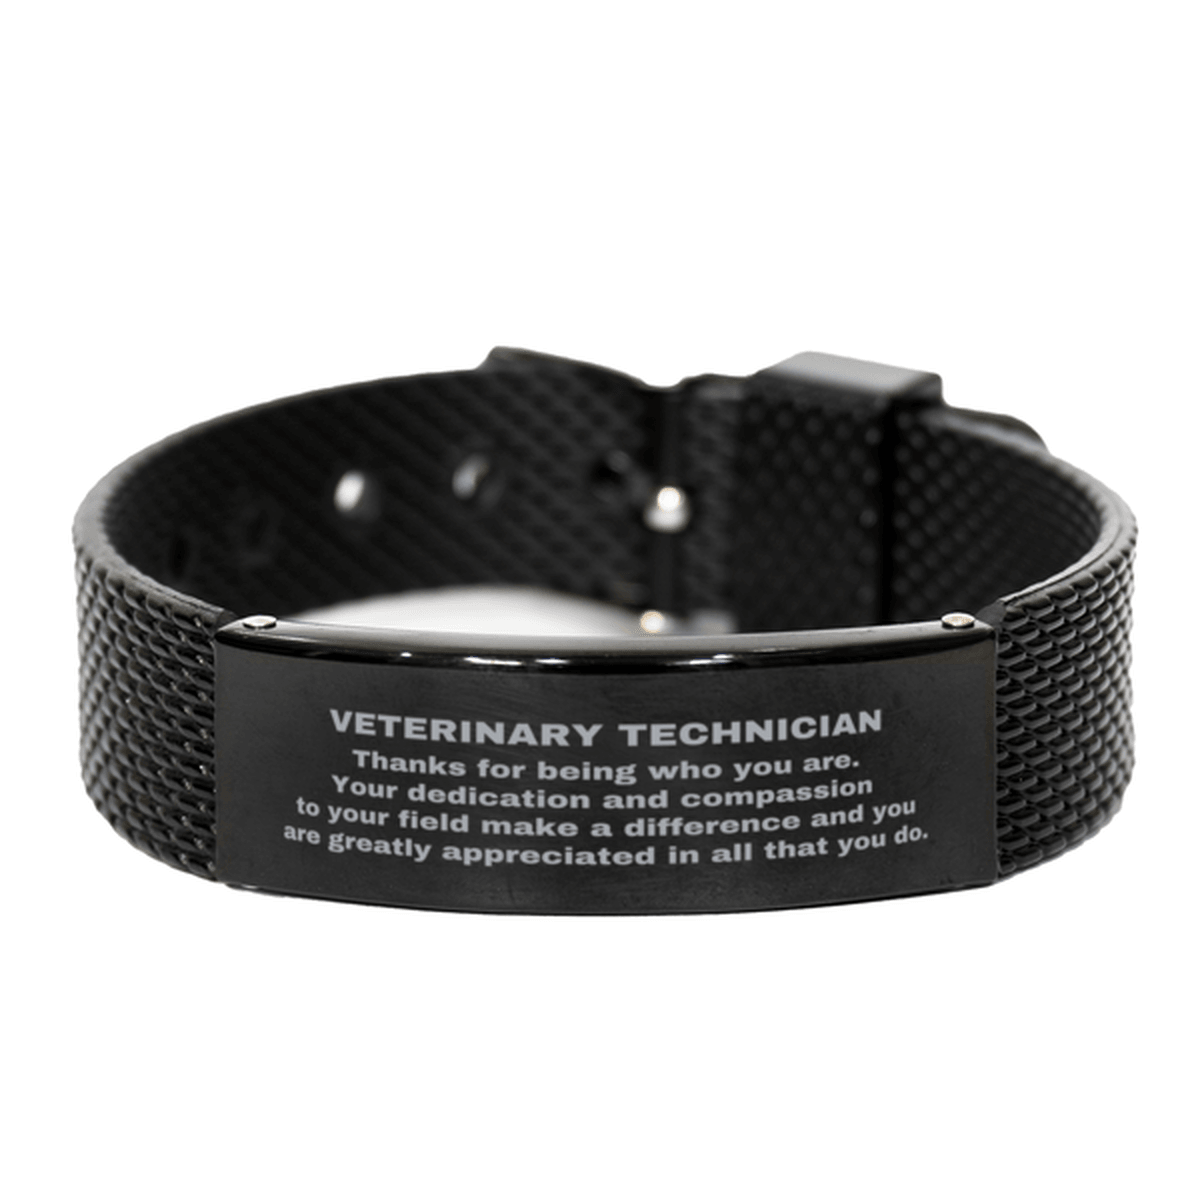 Veterinary Technician Black Shark Mesh Stainless Steel Engraved Bracelet - Thanks for being who you are - Birthday Christmas Jewelry Gifts Coworkers Colleague Boss - Mallard Moon Gift Shop